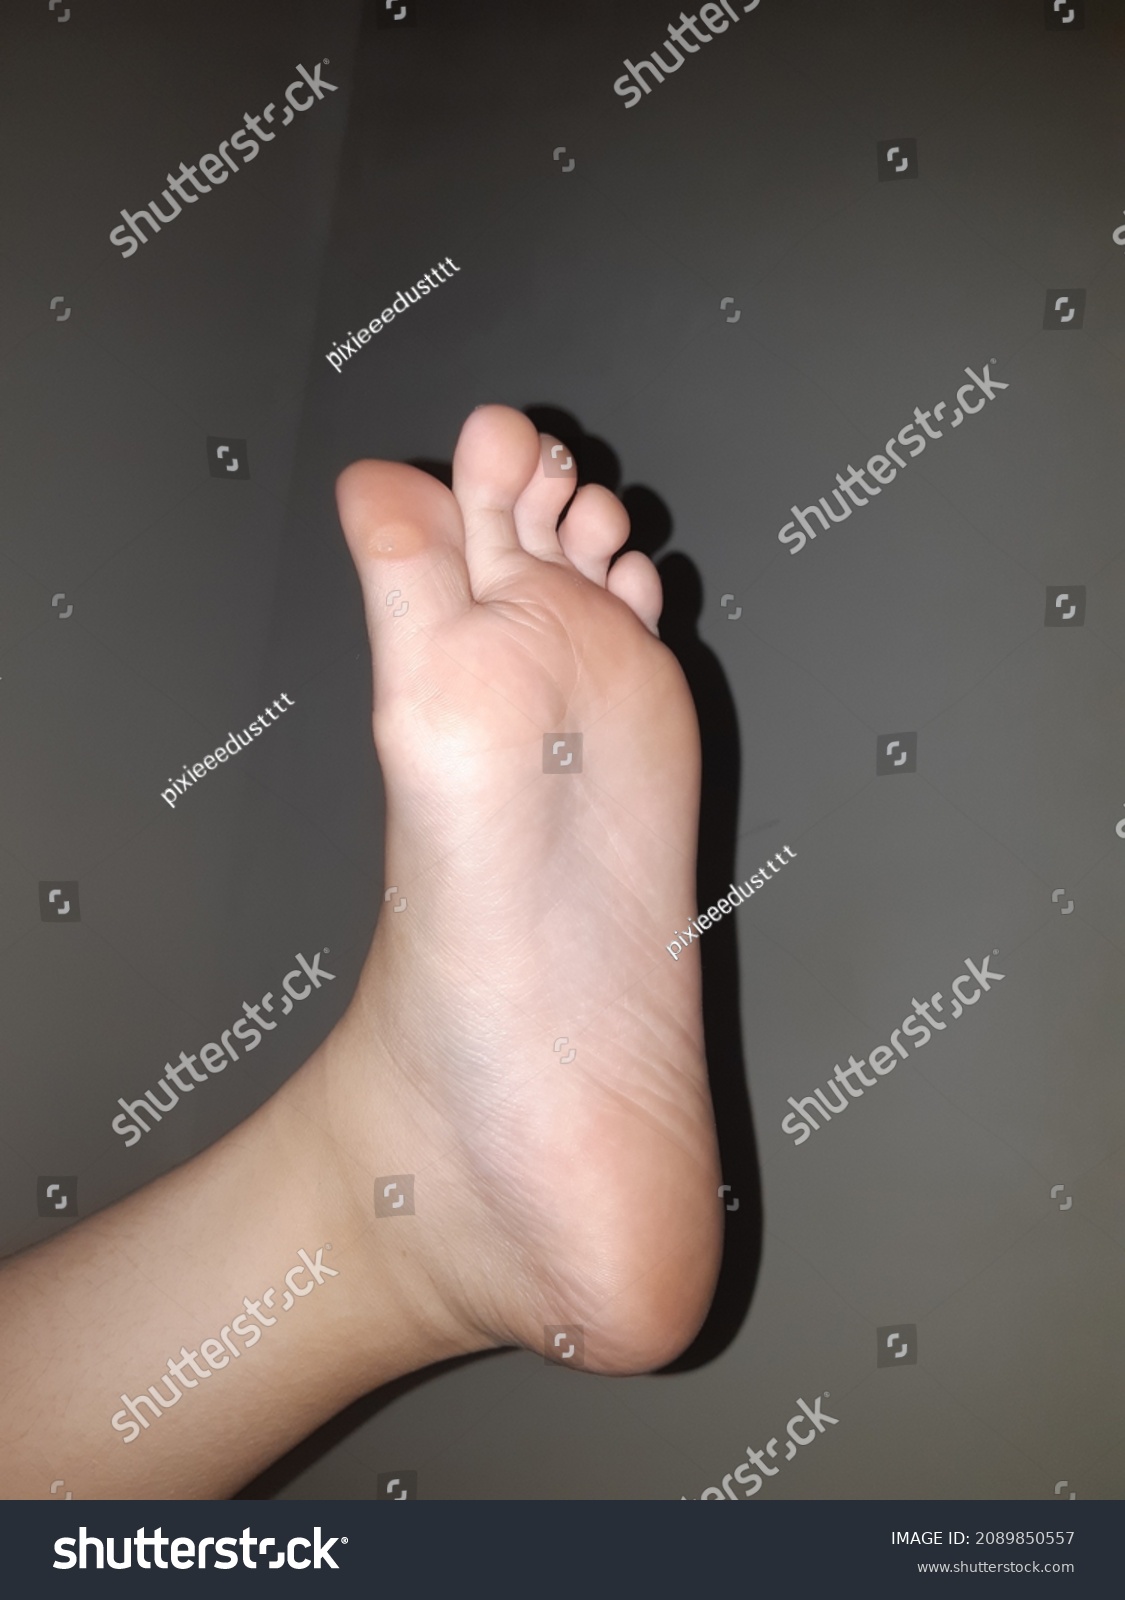 How Many People Have Foot Fetishes